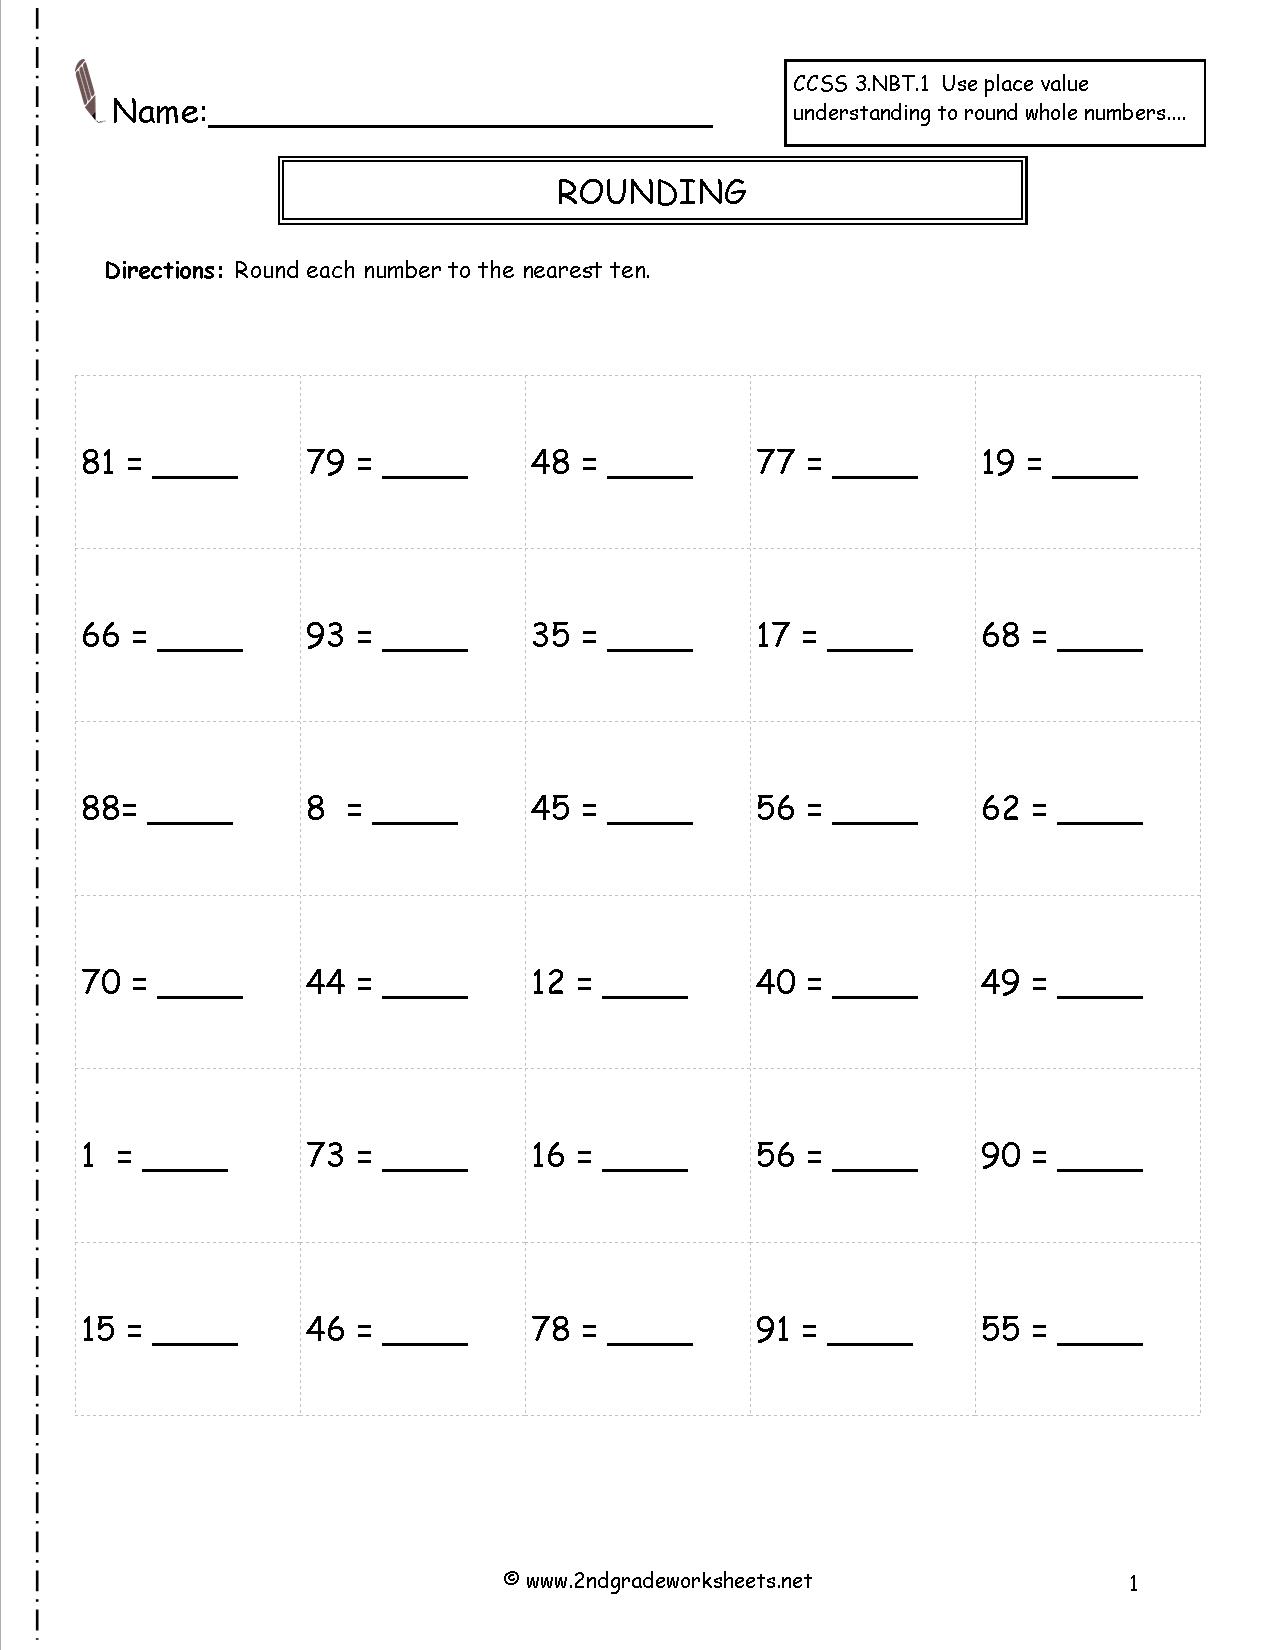 Rounding To The Nearest Tens Worksheet The Best Worksheets Image